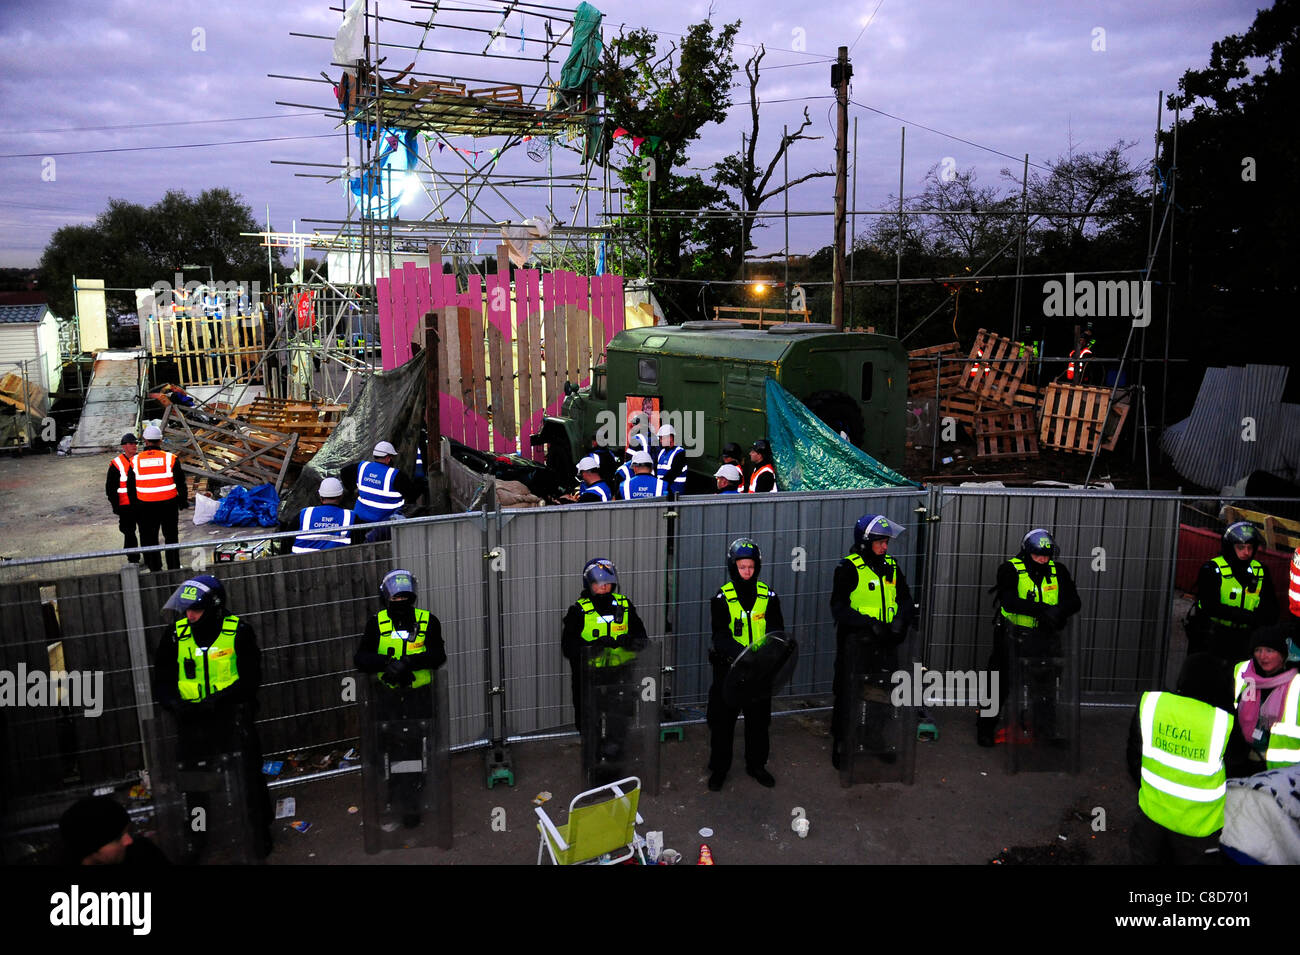 Dawn rises at Dale Farm. Police start work on extricating protesters who have fixed themselves to the scaffolding at the main entrance. Dale Farm, Crays Hill, near Basildon, Essex, UK, 20th October 2011 Stock Photo